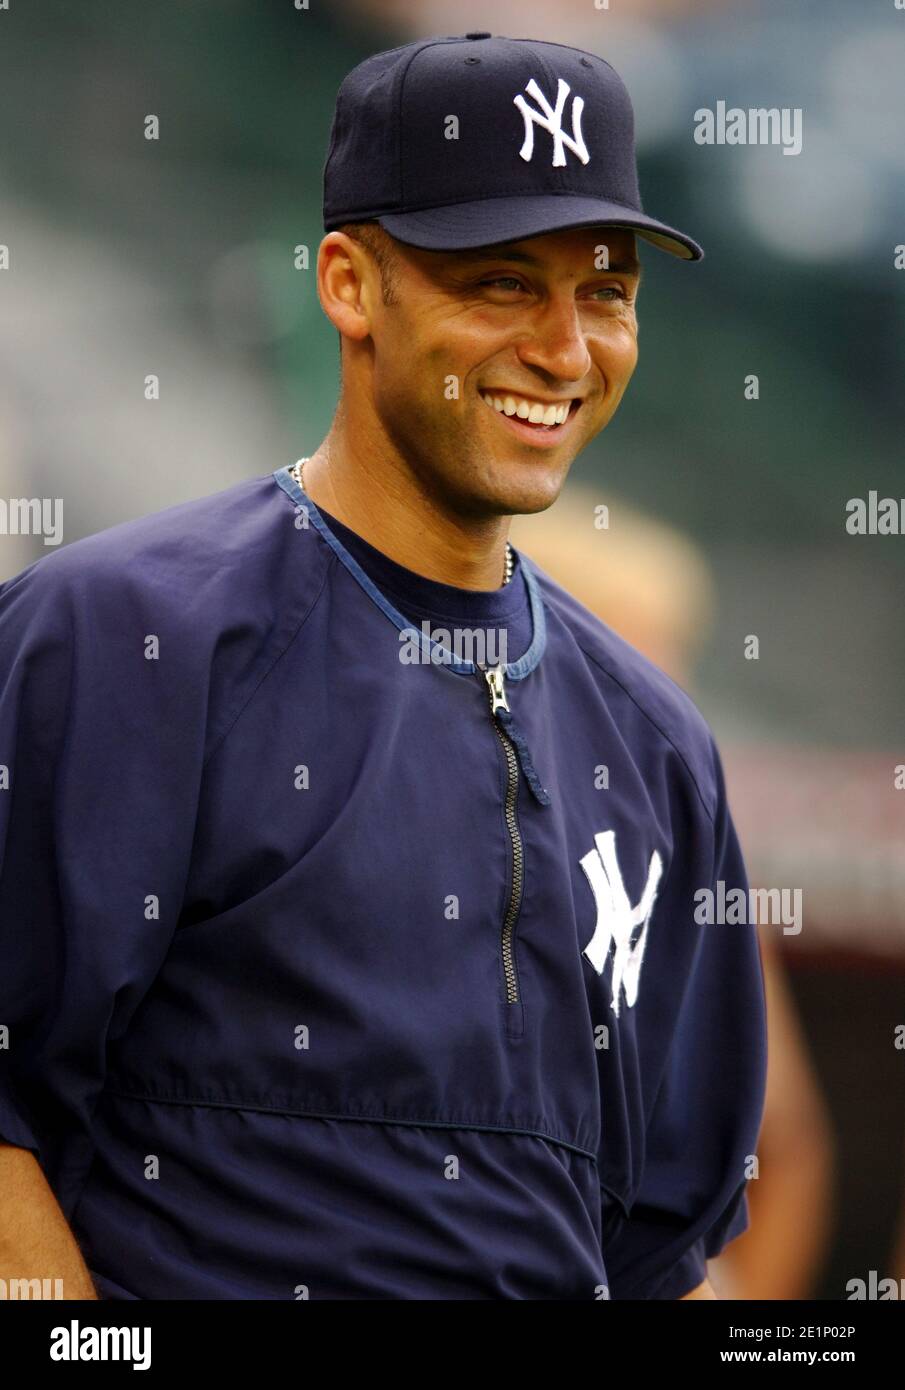 Derek Jeter of the New York Yankees during batting practice before game against the Los Angeles Angels of Anaheim at Angel Stadium in Anaheim, Calif. Stock Photo